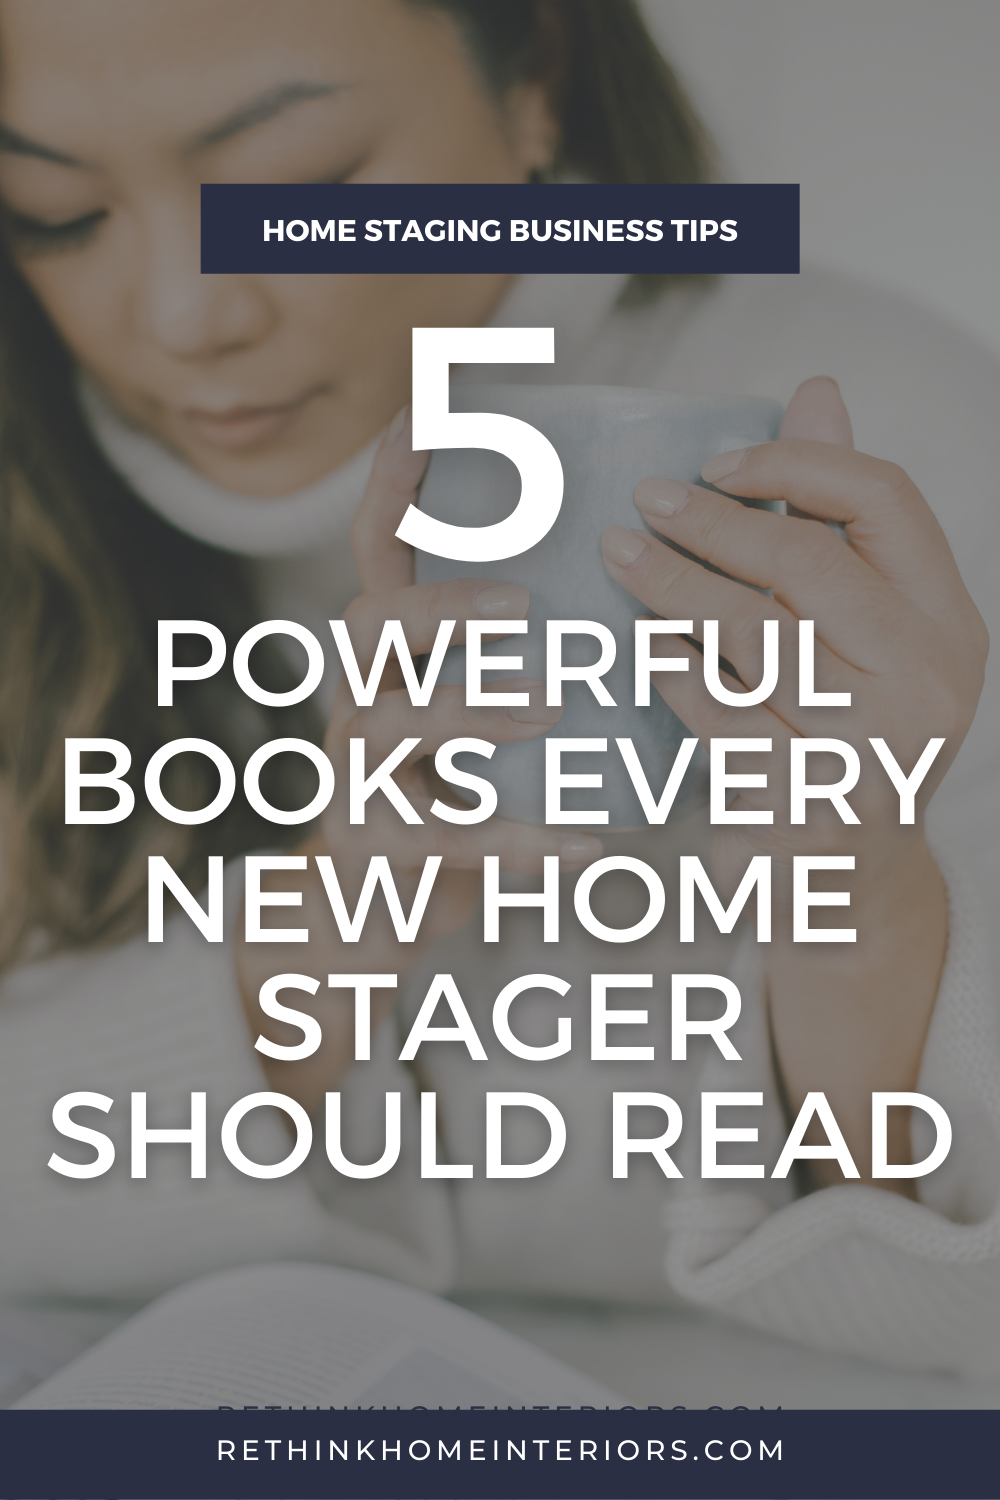 5 Powerful Home Staging Business Books every new home stager should read.